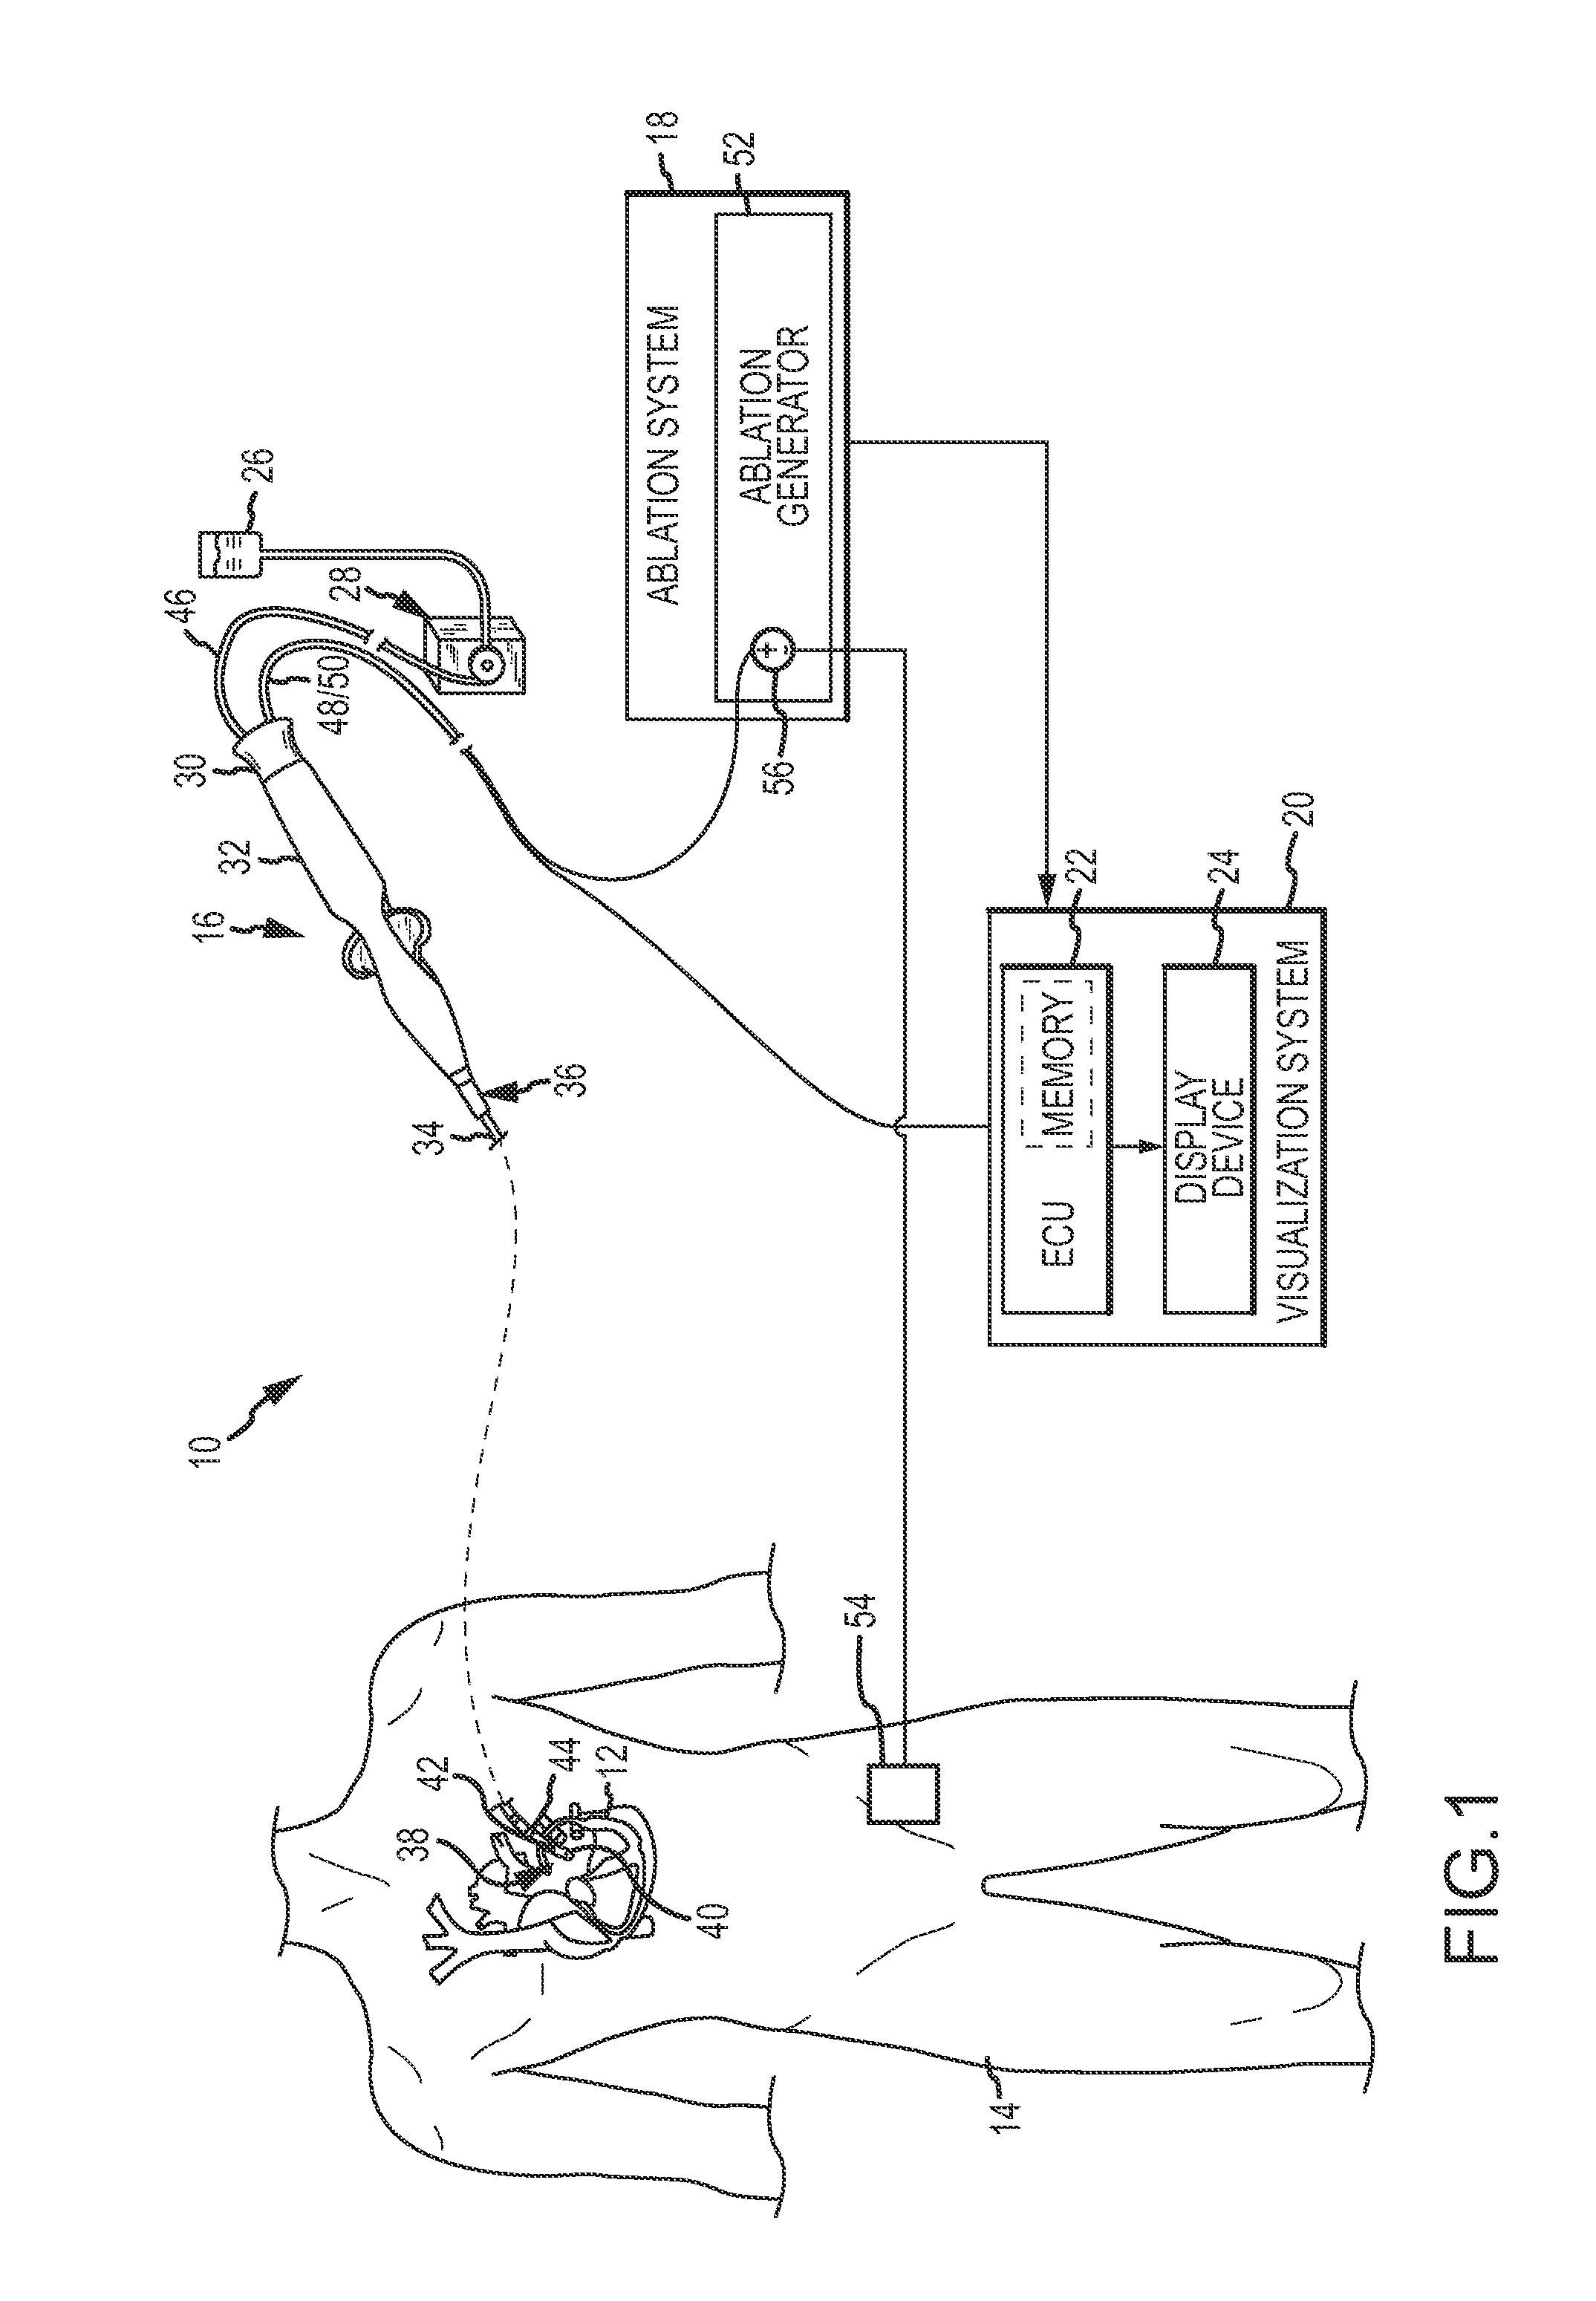 Catheter electrode assemblies and methods of construction therefor